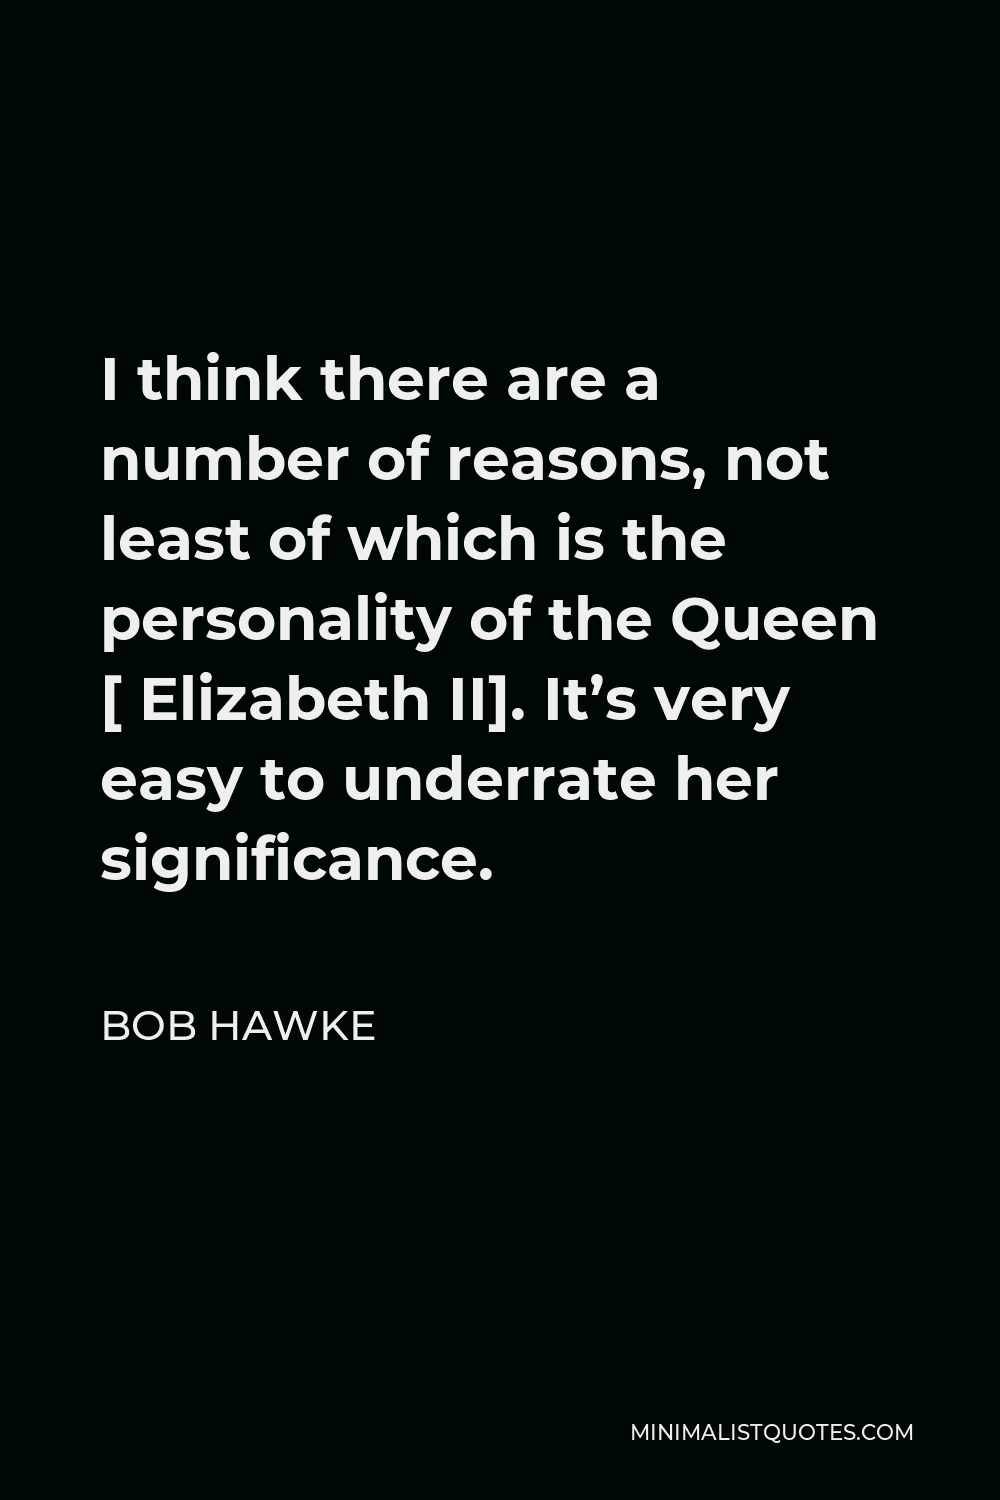 Bob Hawke Quote - I think there are a number of reasons, not least of which is the personality of the Queen [ Elizabeth II]. It’s very easy to underrate her significance.